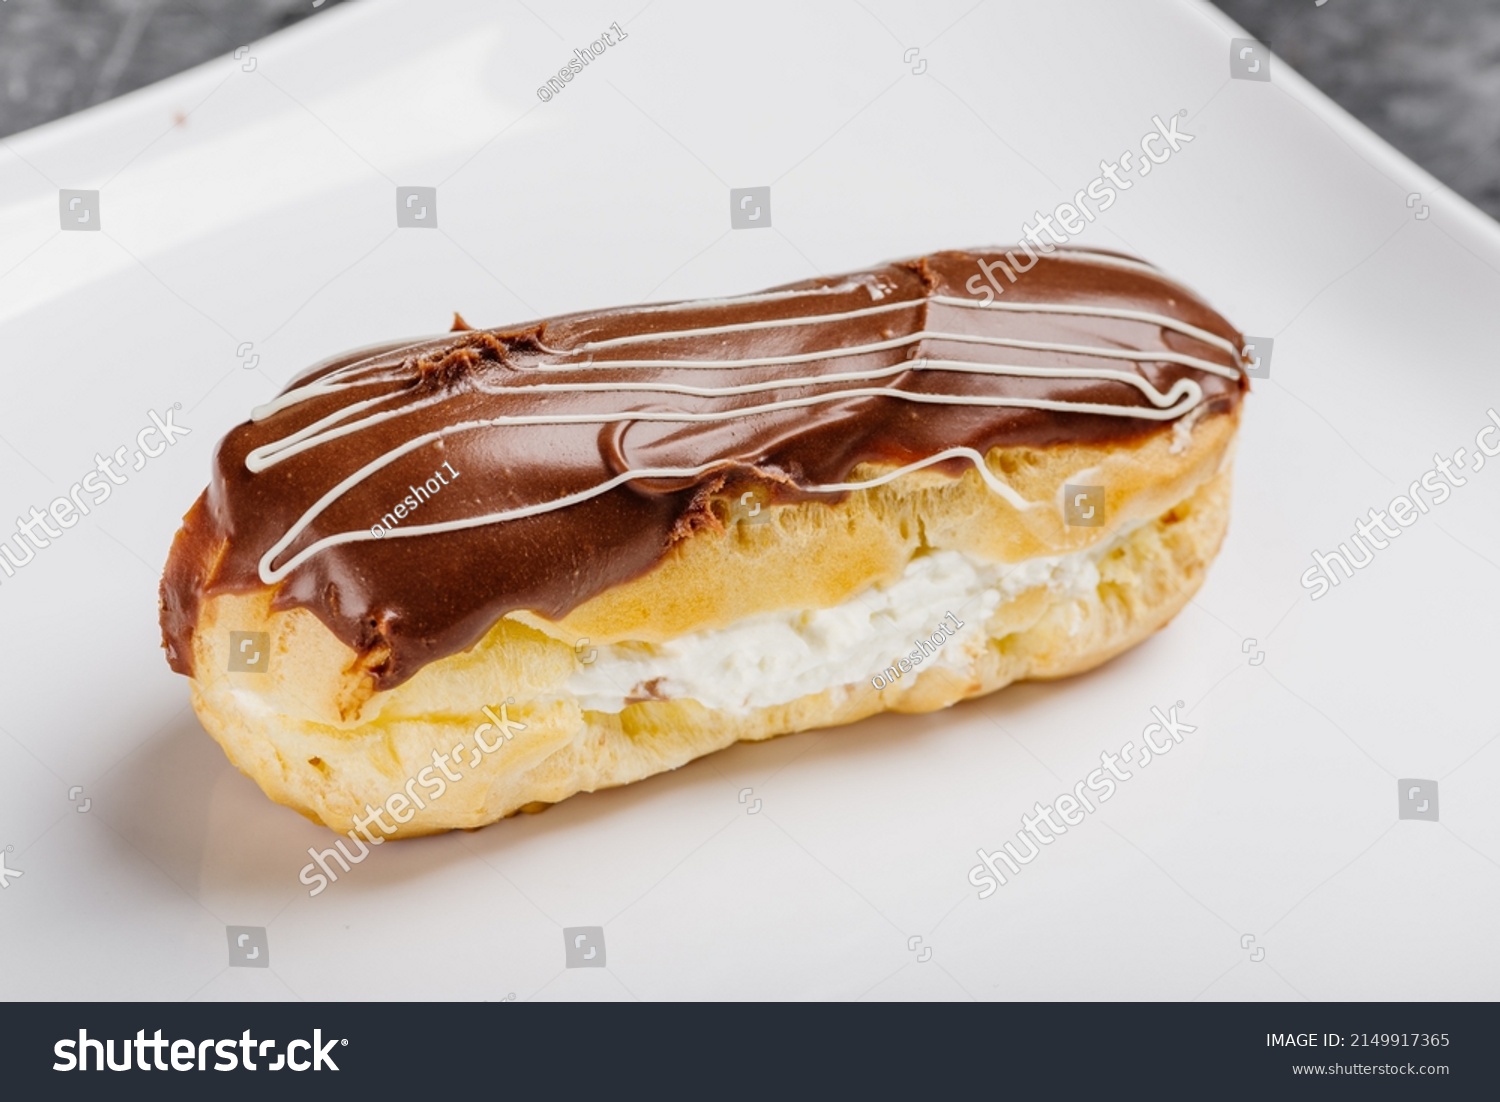 Eclair with chocolate on a white plate. Traditional french eclairs with chocolate. Tasty colorful dessert profiteroles. chocolate eclair, Traditional french dessert eclair with custard and chocolate.  #2149917365